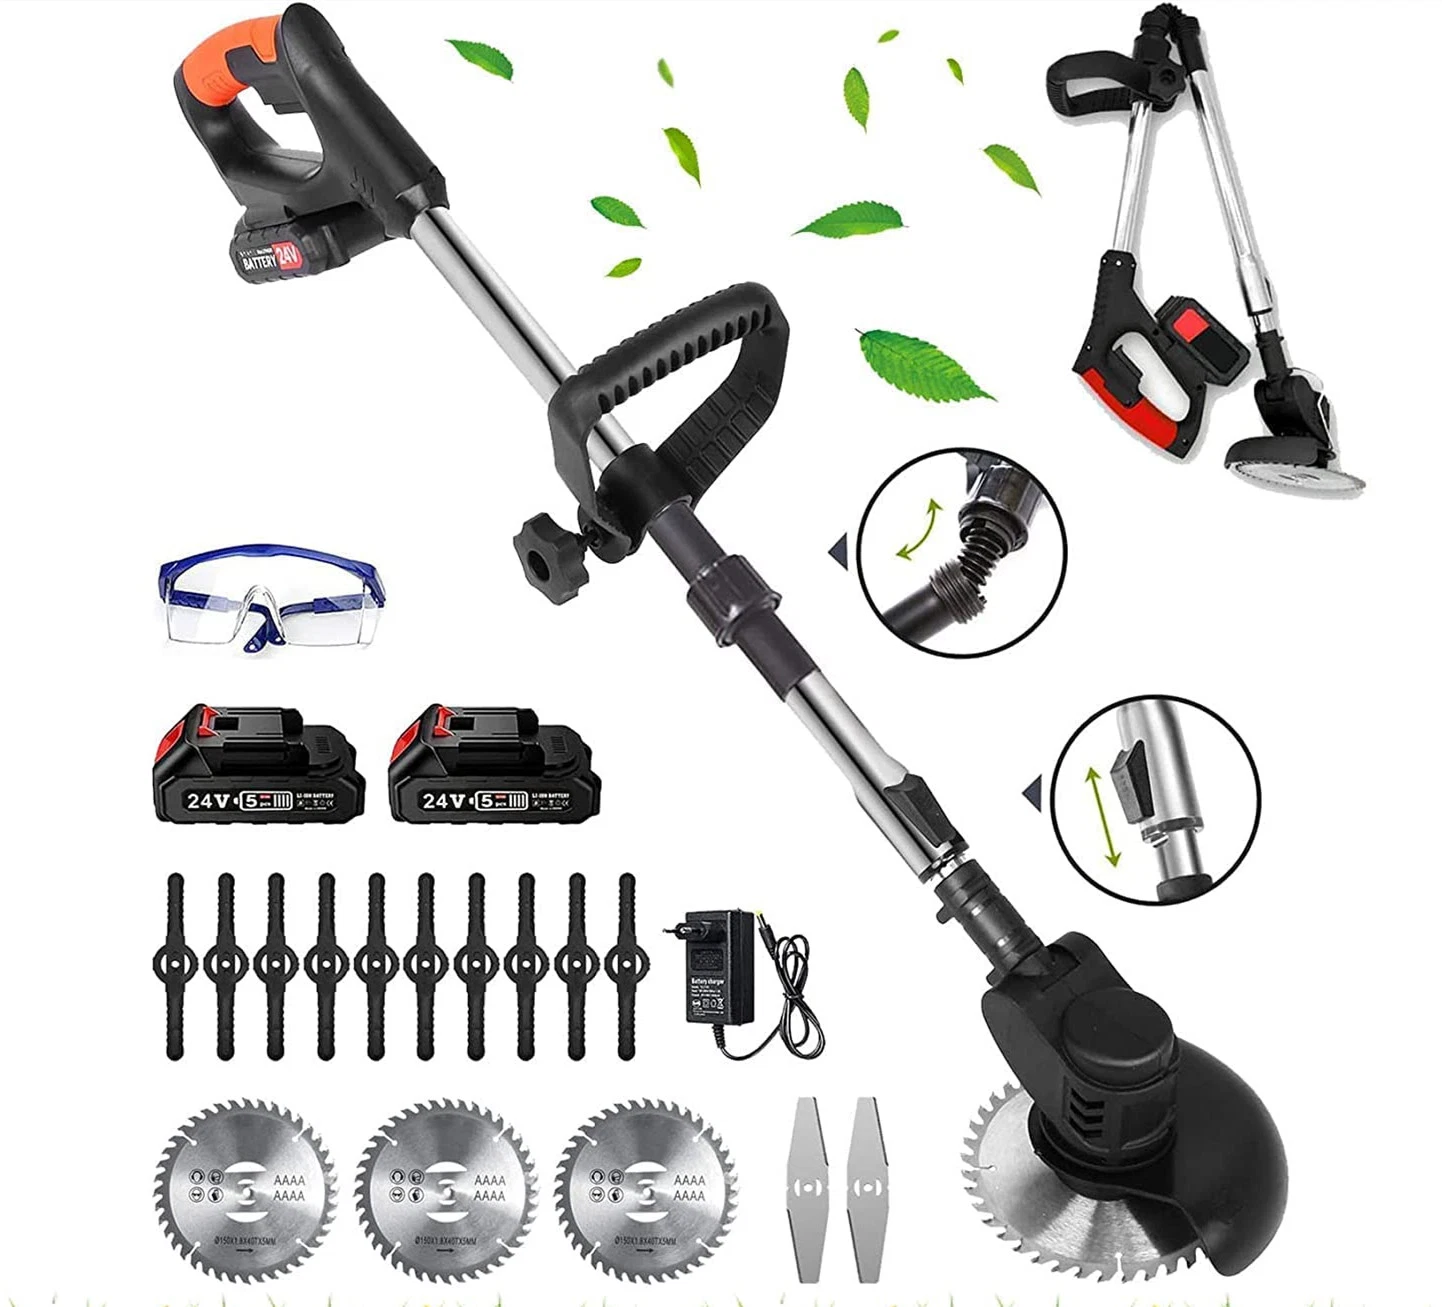 Handheld Electric Cordless Grass Trimmer with Metal Blade